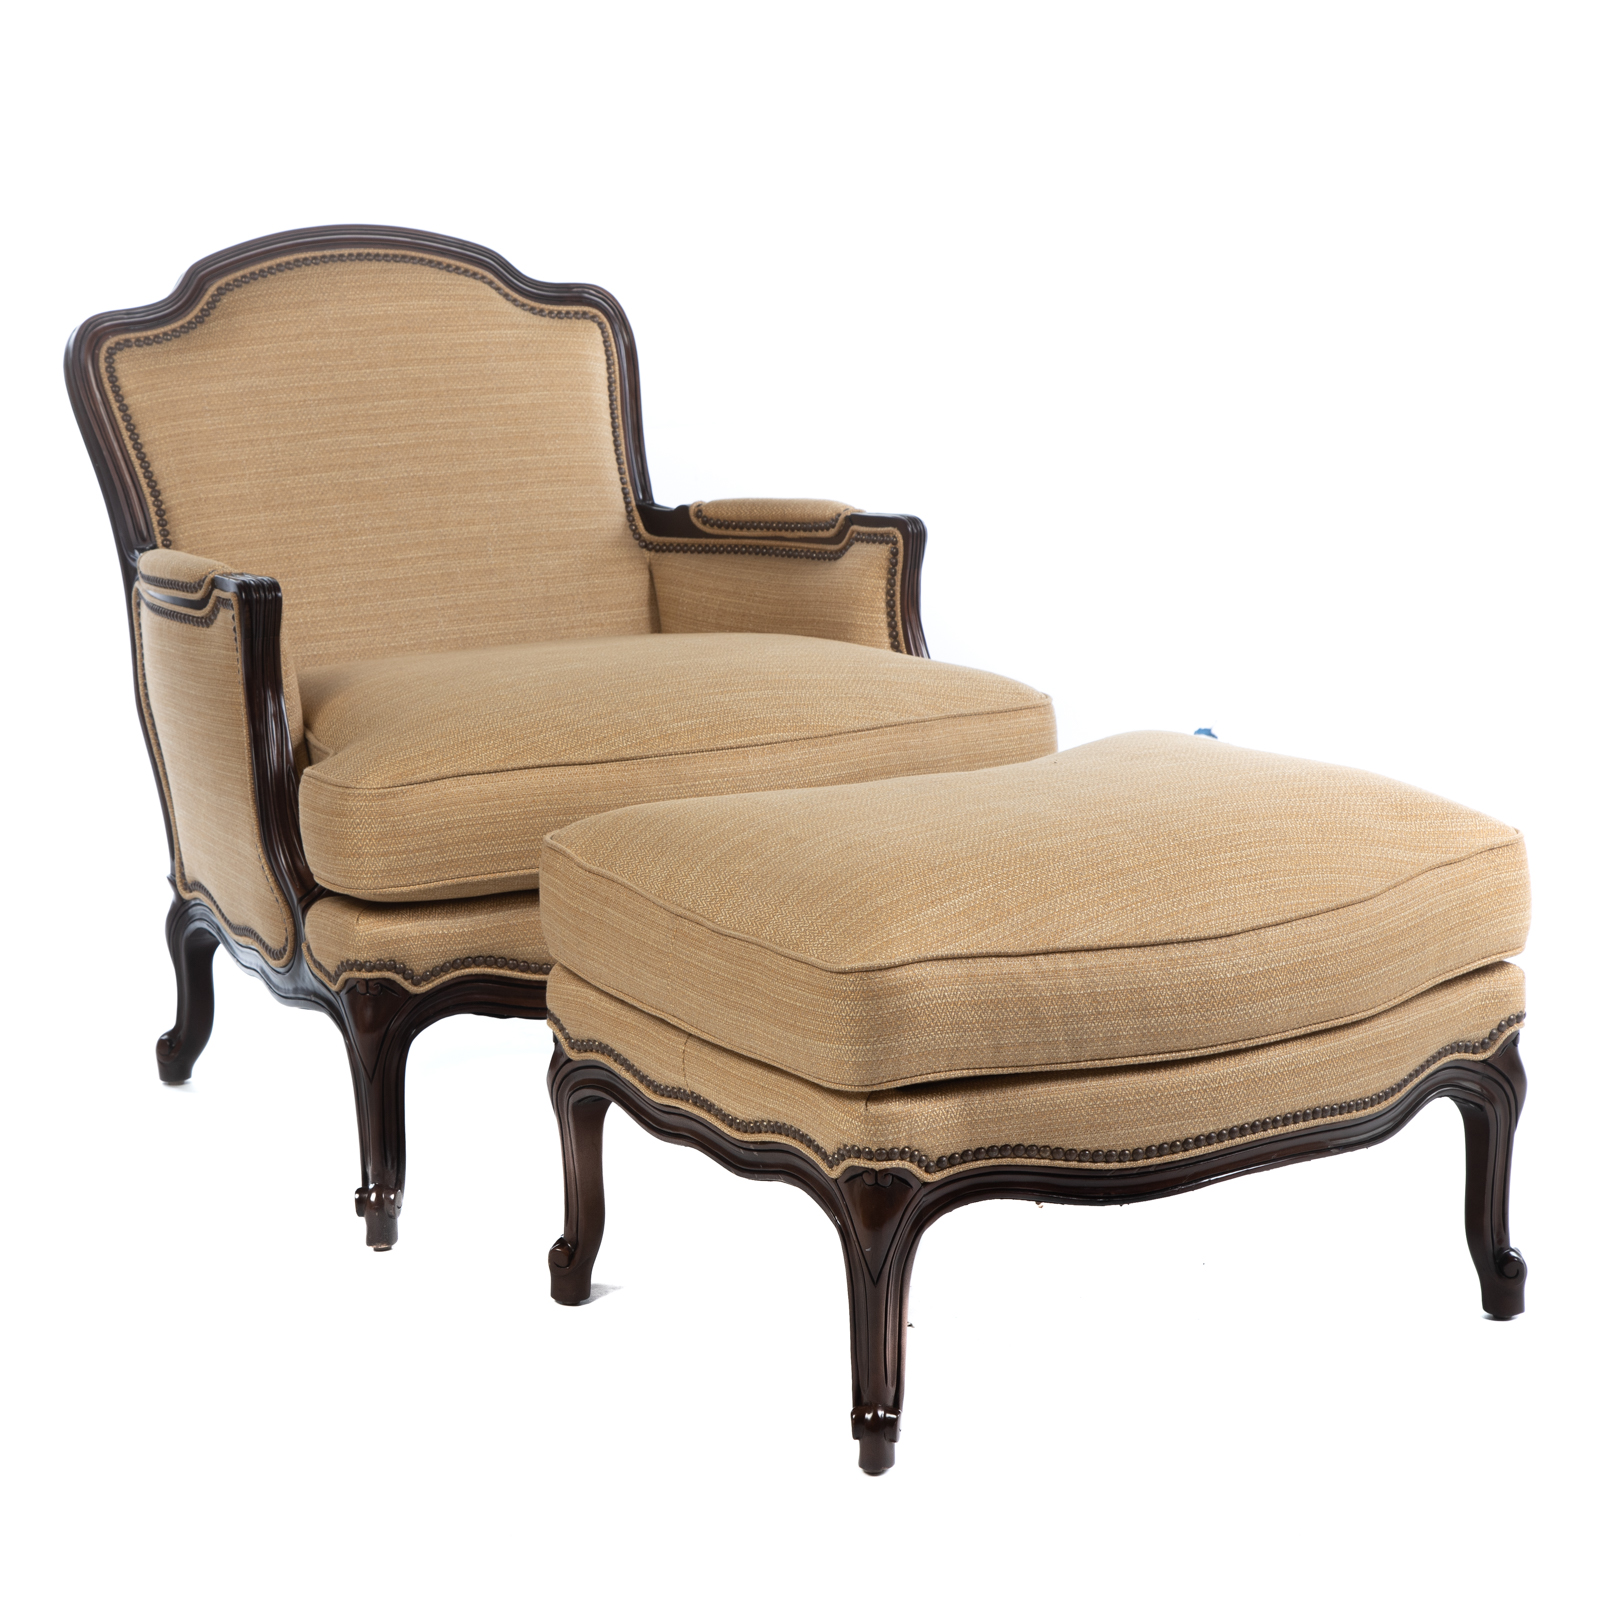 LOUIS XV STYLE UPHOLSTERED CHAIR 2875bc